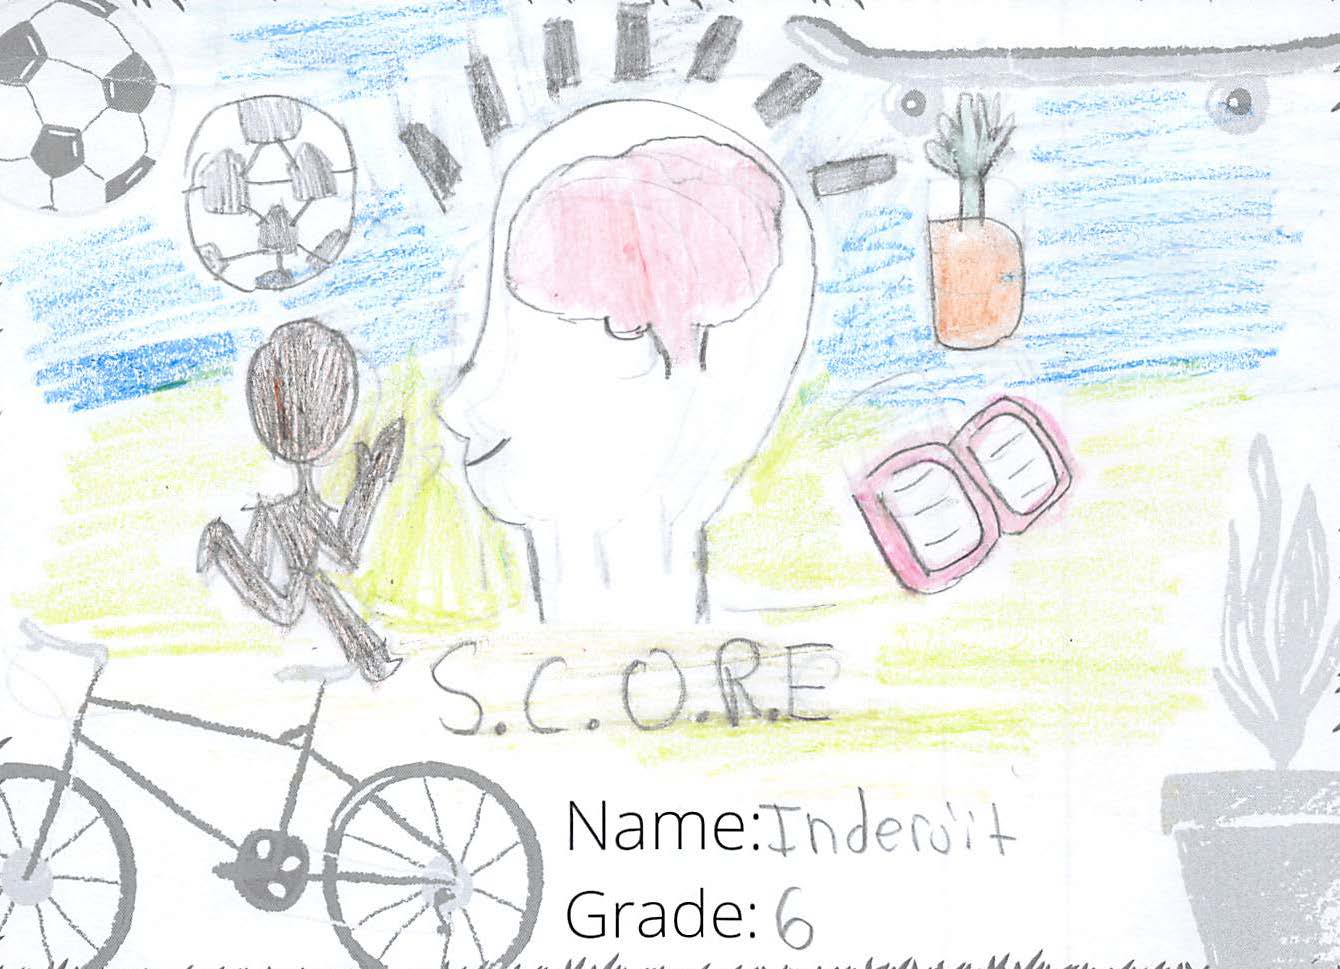 Pencil crayon drawing for the SCORE! logo contest. The drawing includes a brain, soccer ball, plant, person running, and a book.